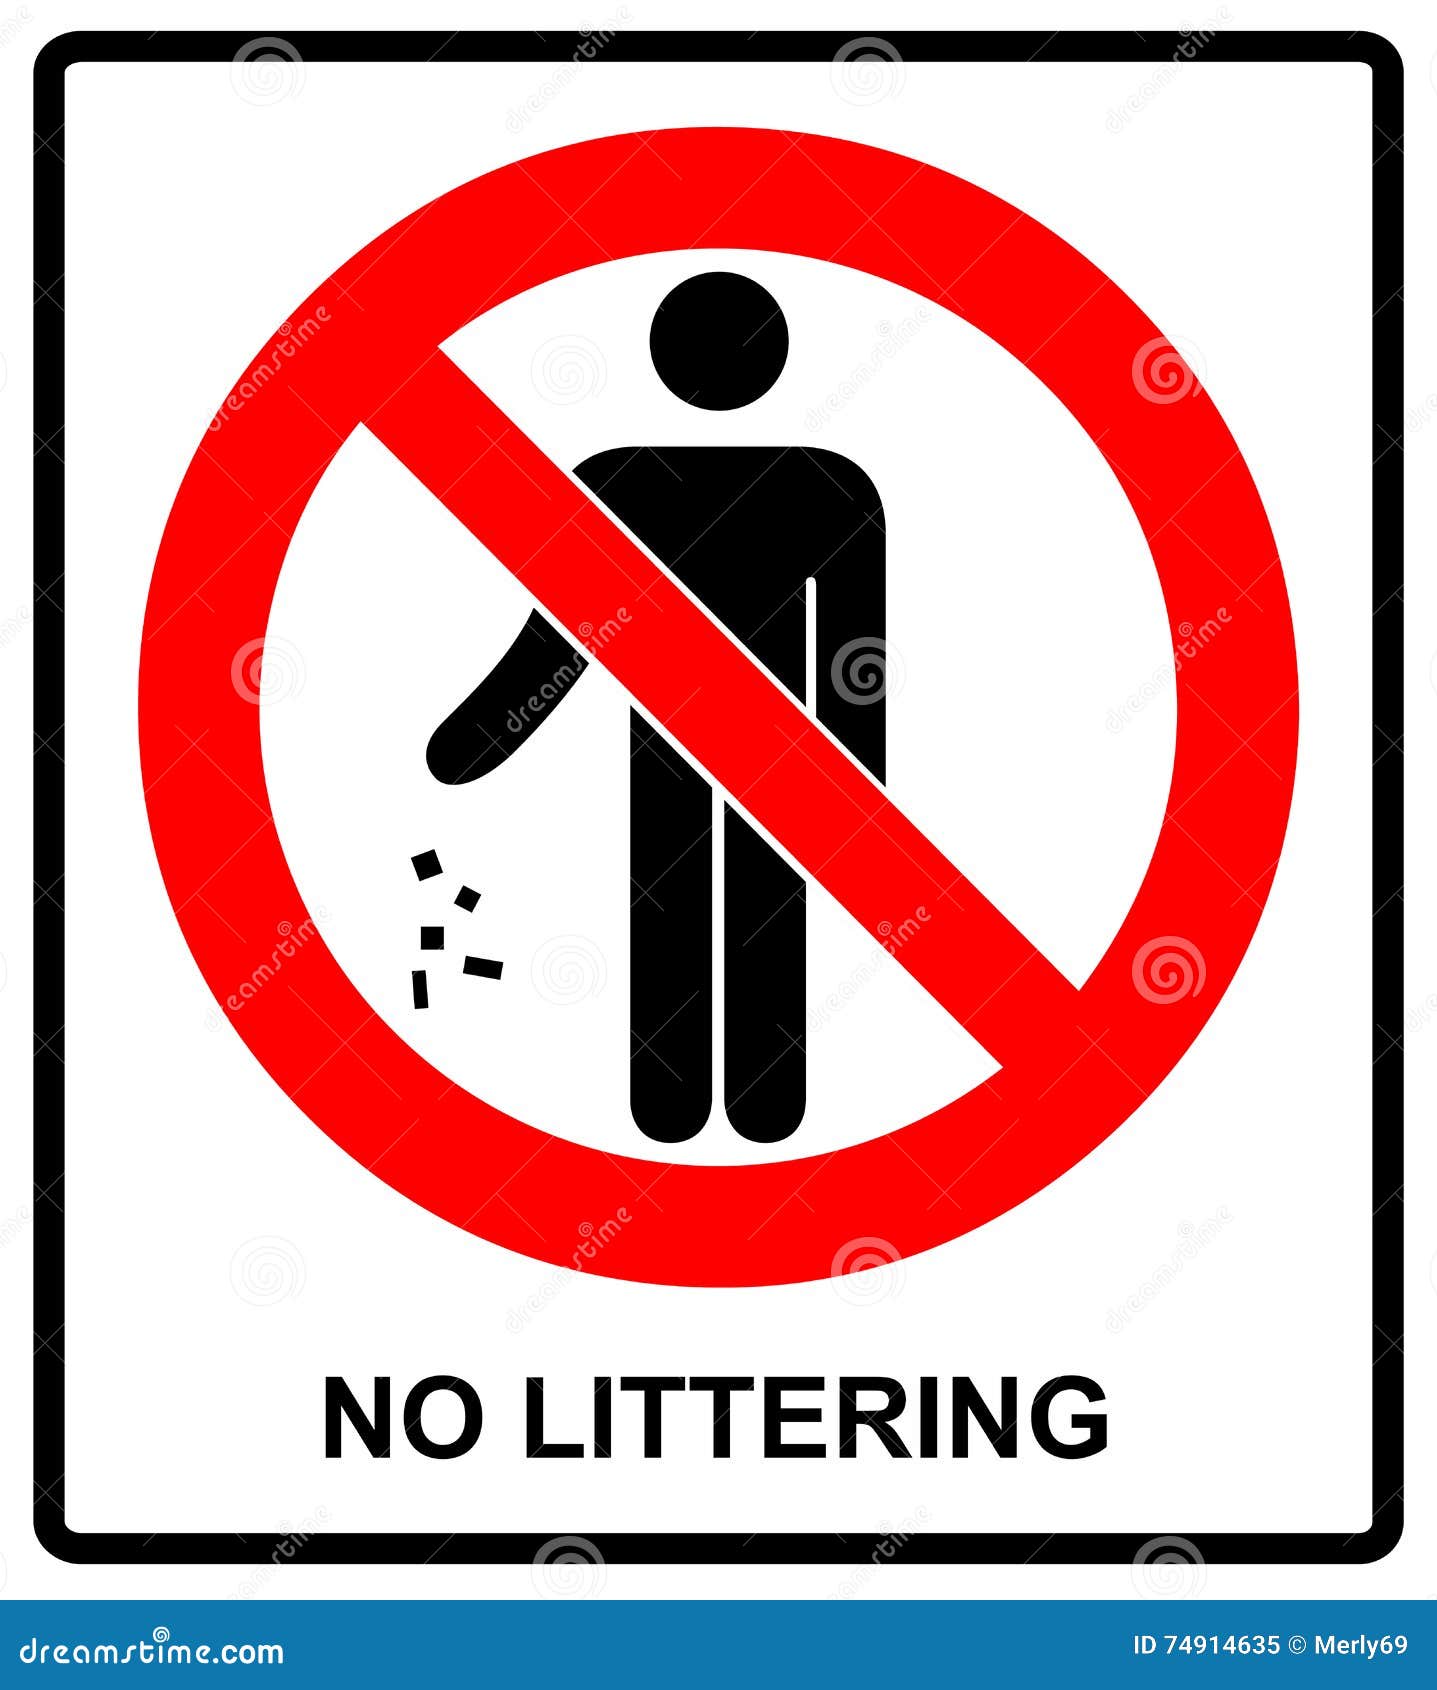 no littering sign  